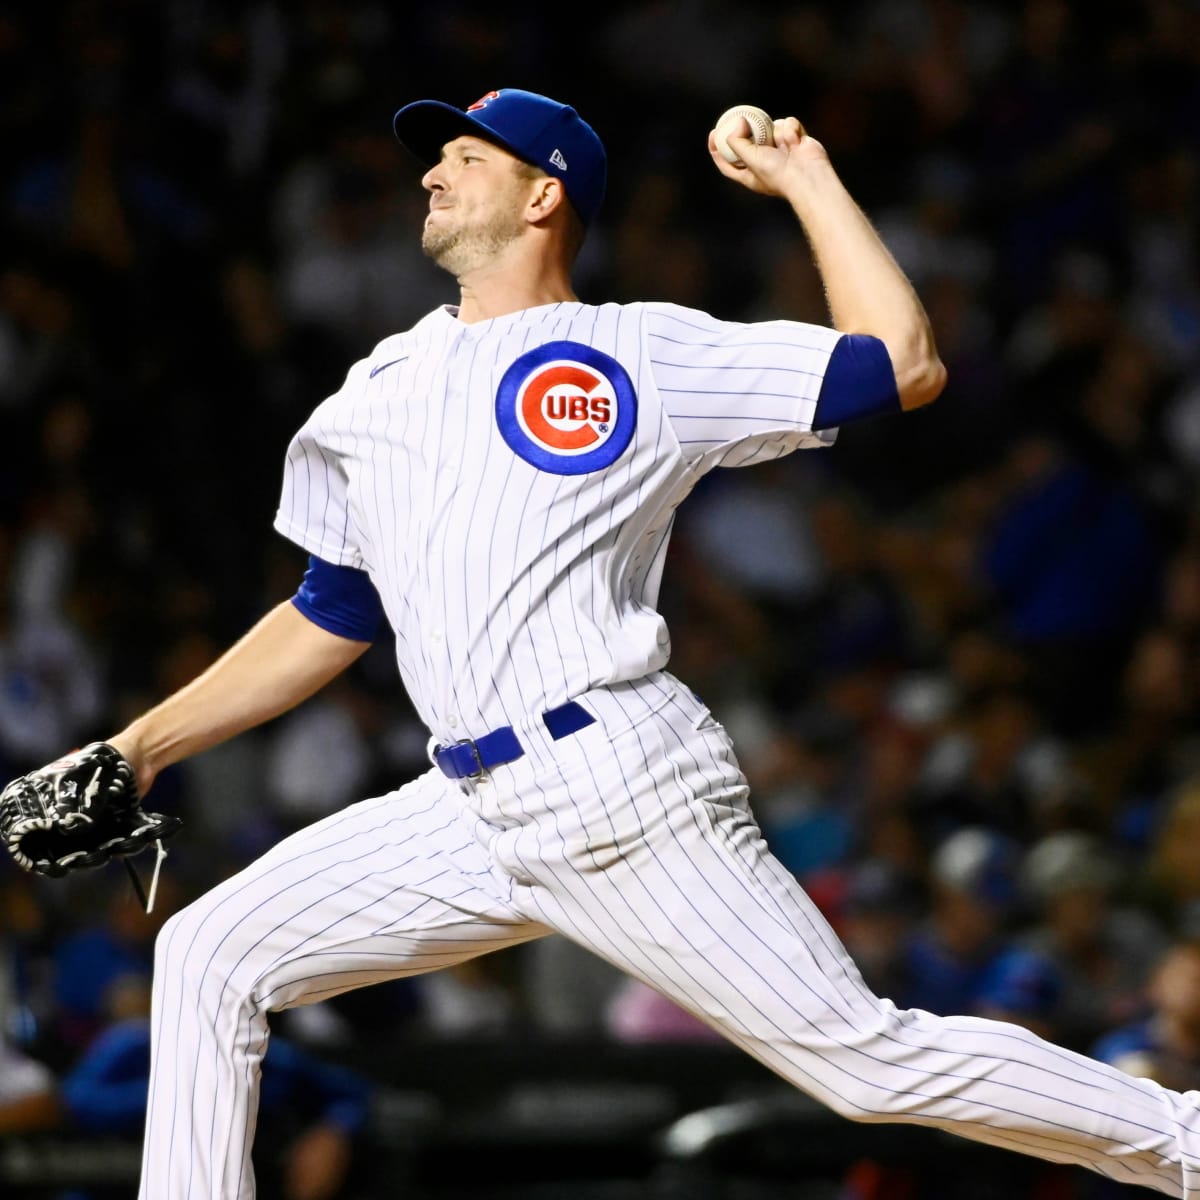 Smyly leads Cubs to win over Reds in Field of Dreams game